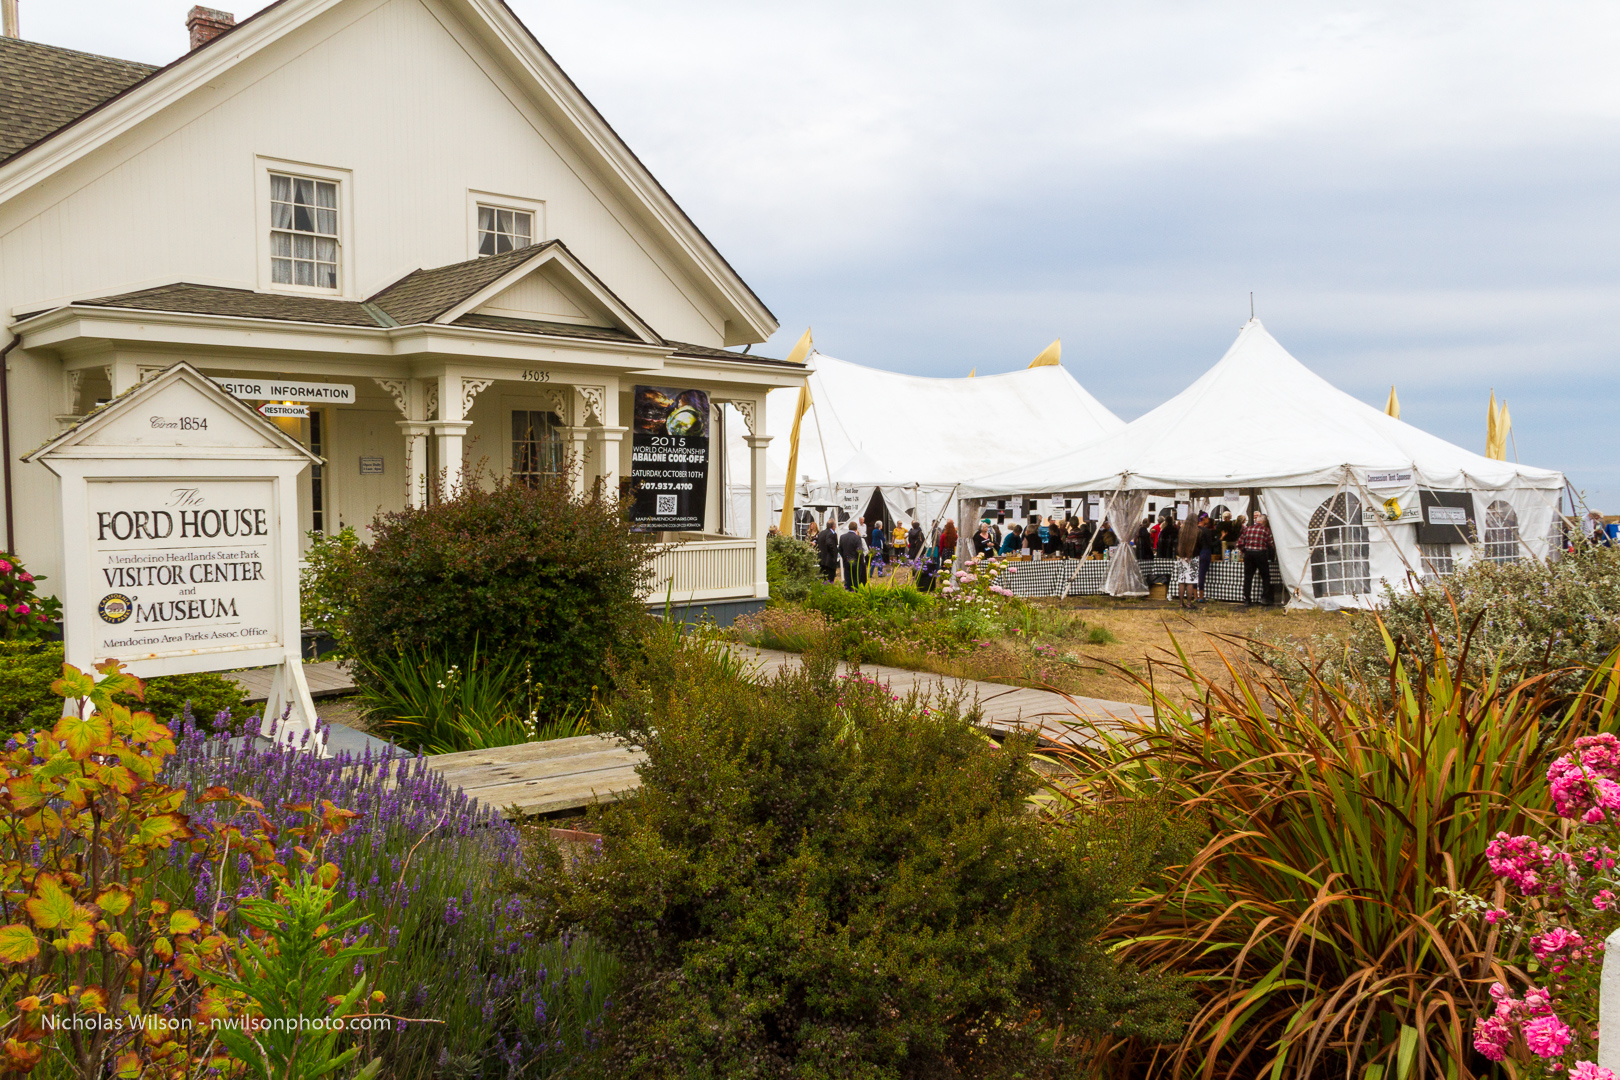 The Mendocino Music Festival 2015 tent concert hall on Mendocino Headlands State Park grounds.